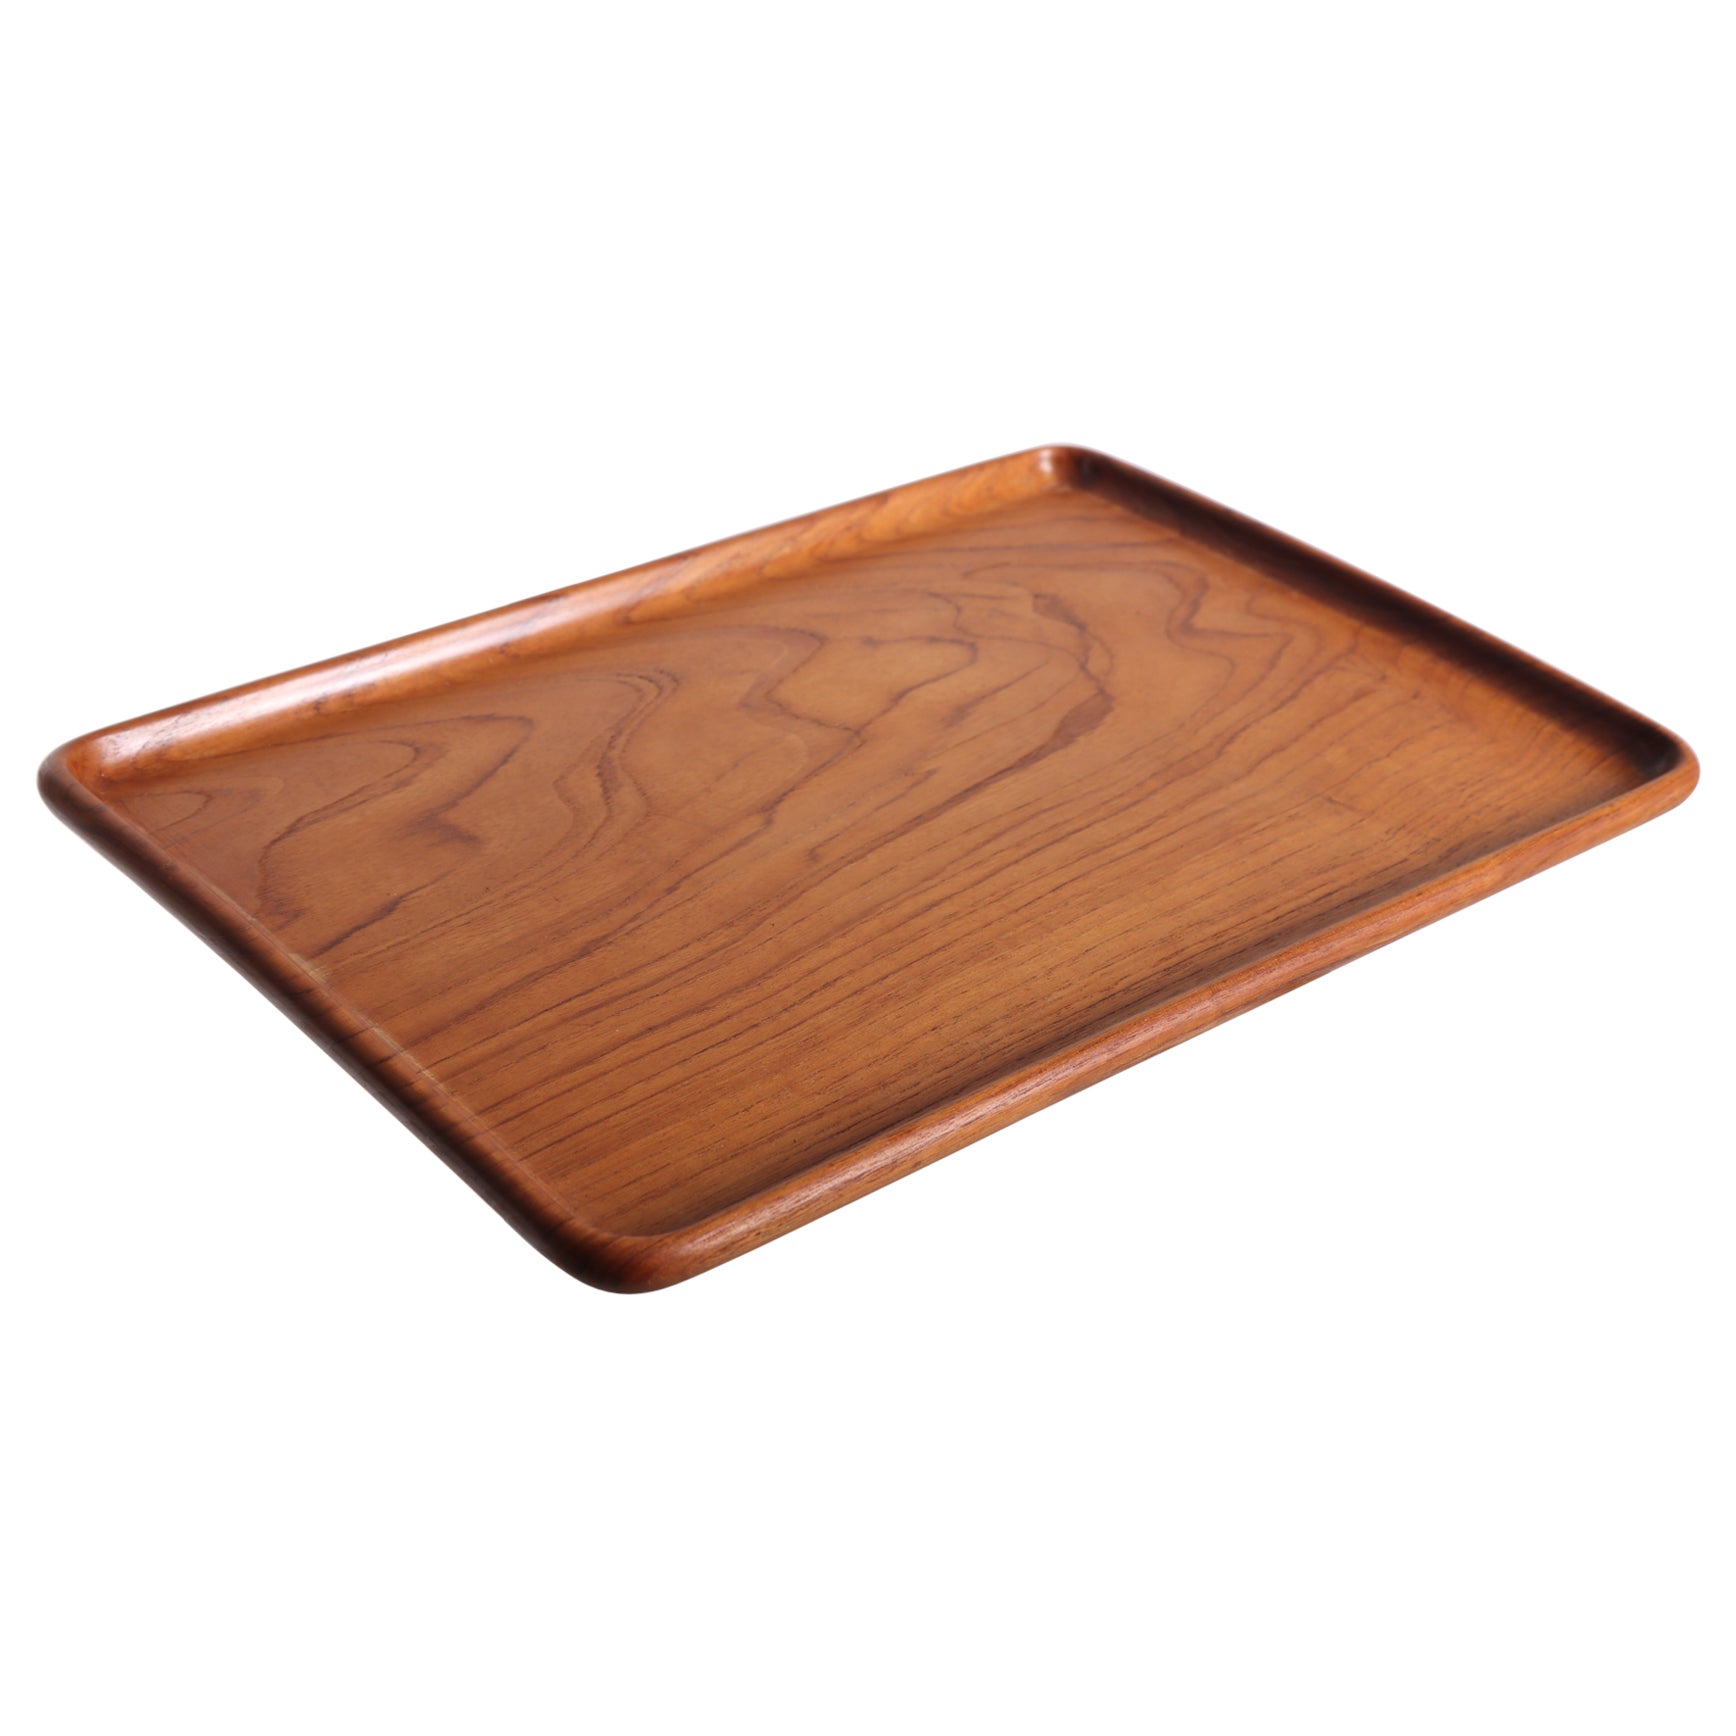 Midcentury Serving Tray in Solid Teak by Kay Bojesen, 1950s For Sale